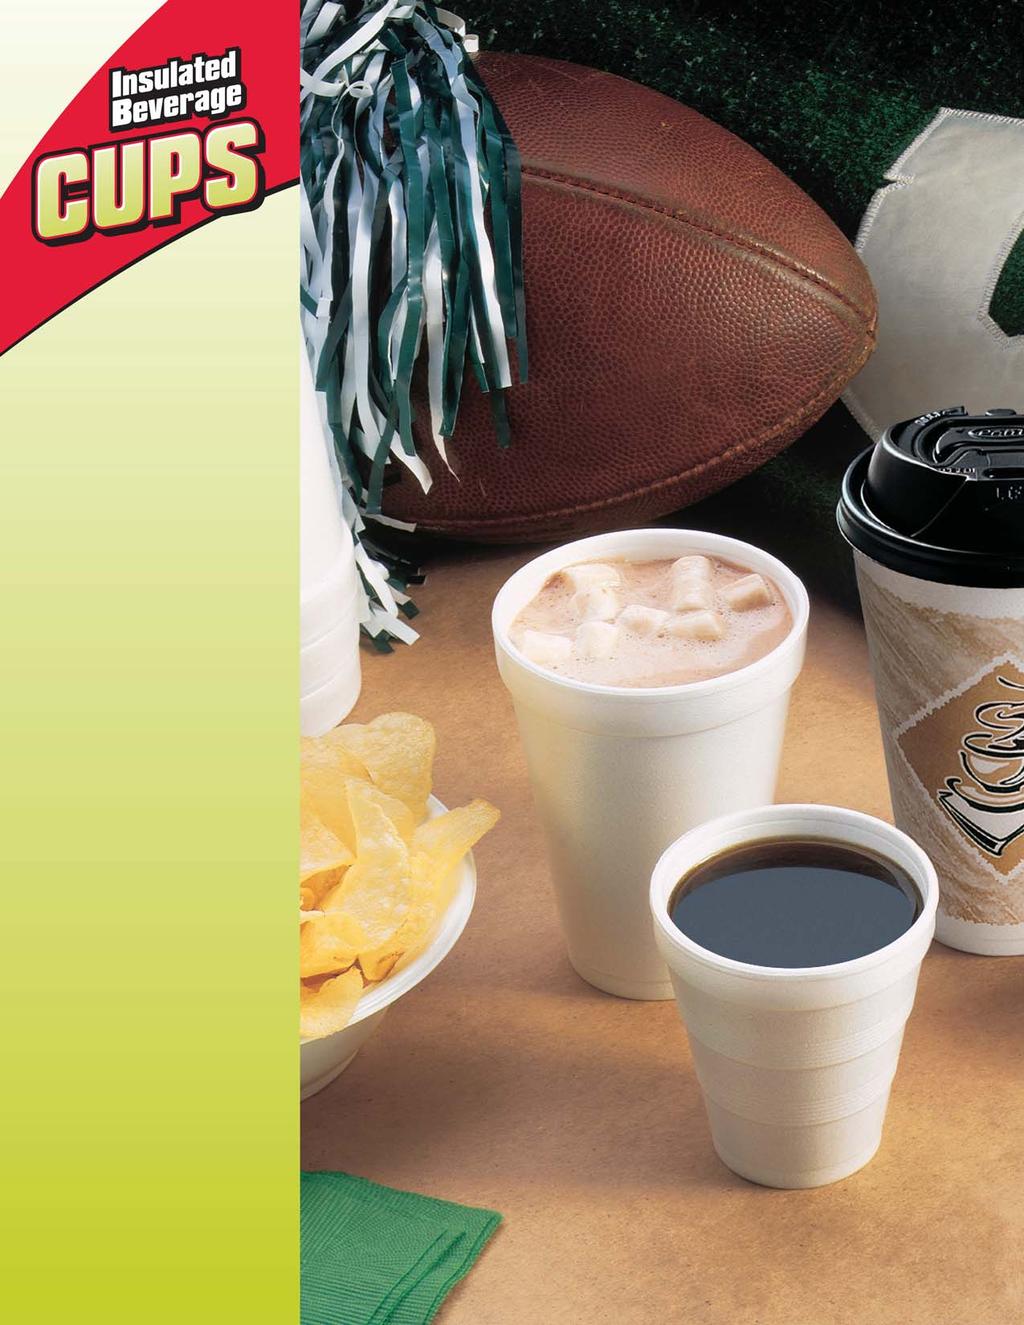 Dart Insulated Beverage Cups are available in 1.25 through 20 ounce sizes. Because of their insulation, they act as 2 Cups in One, ideal for use with both hot and cold beverages.